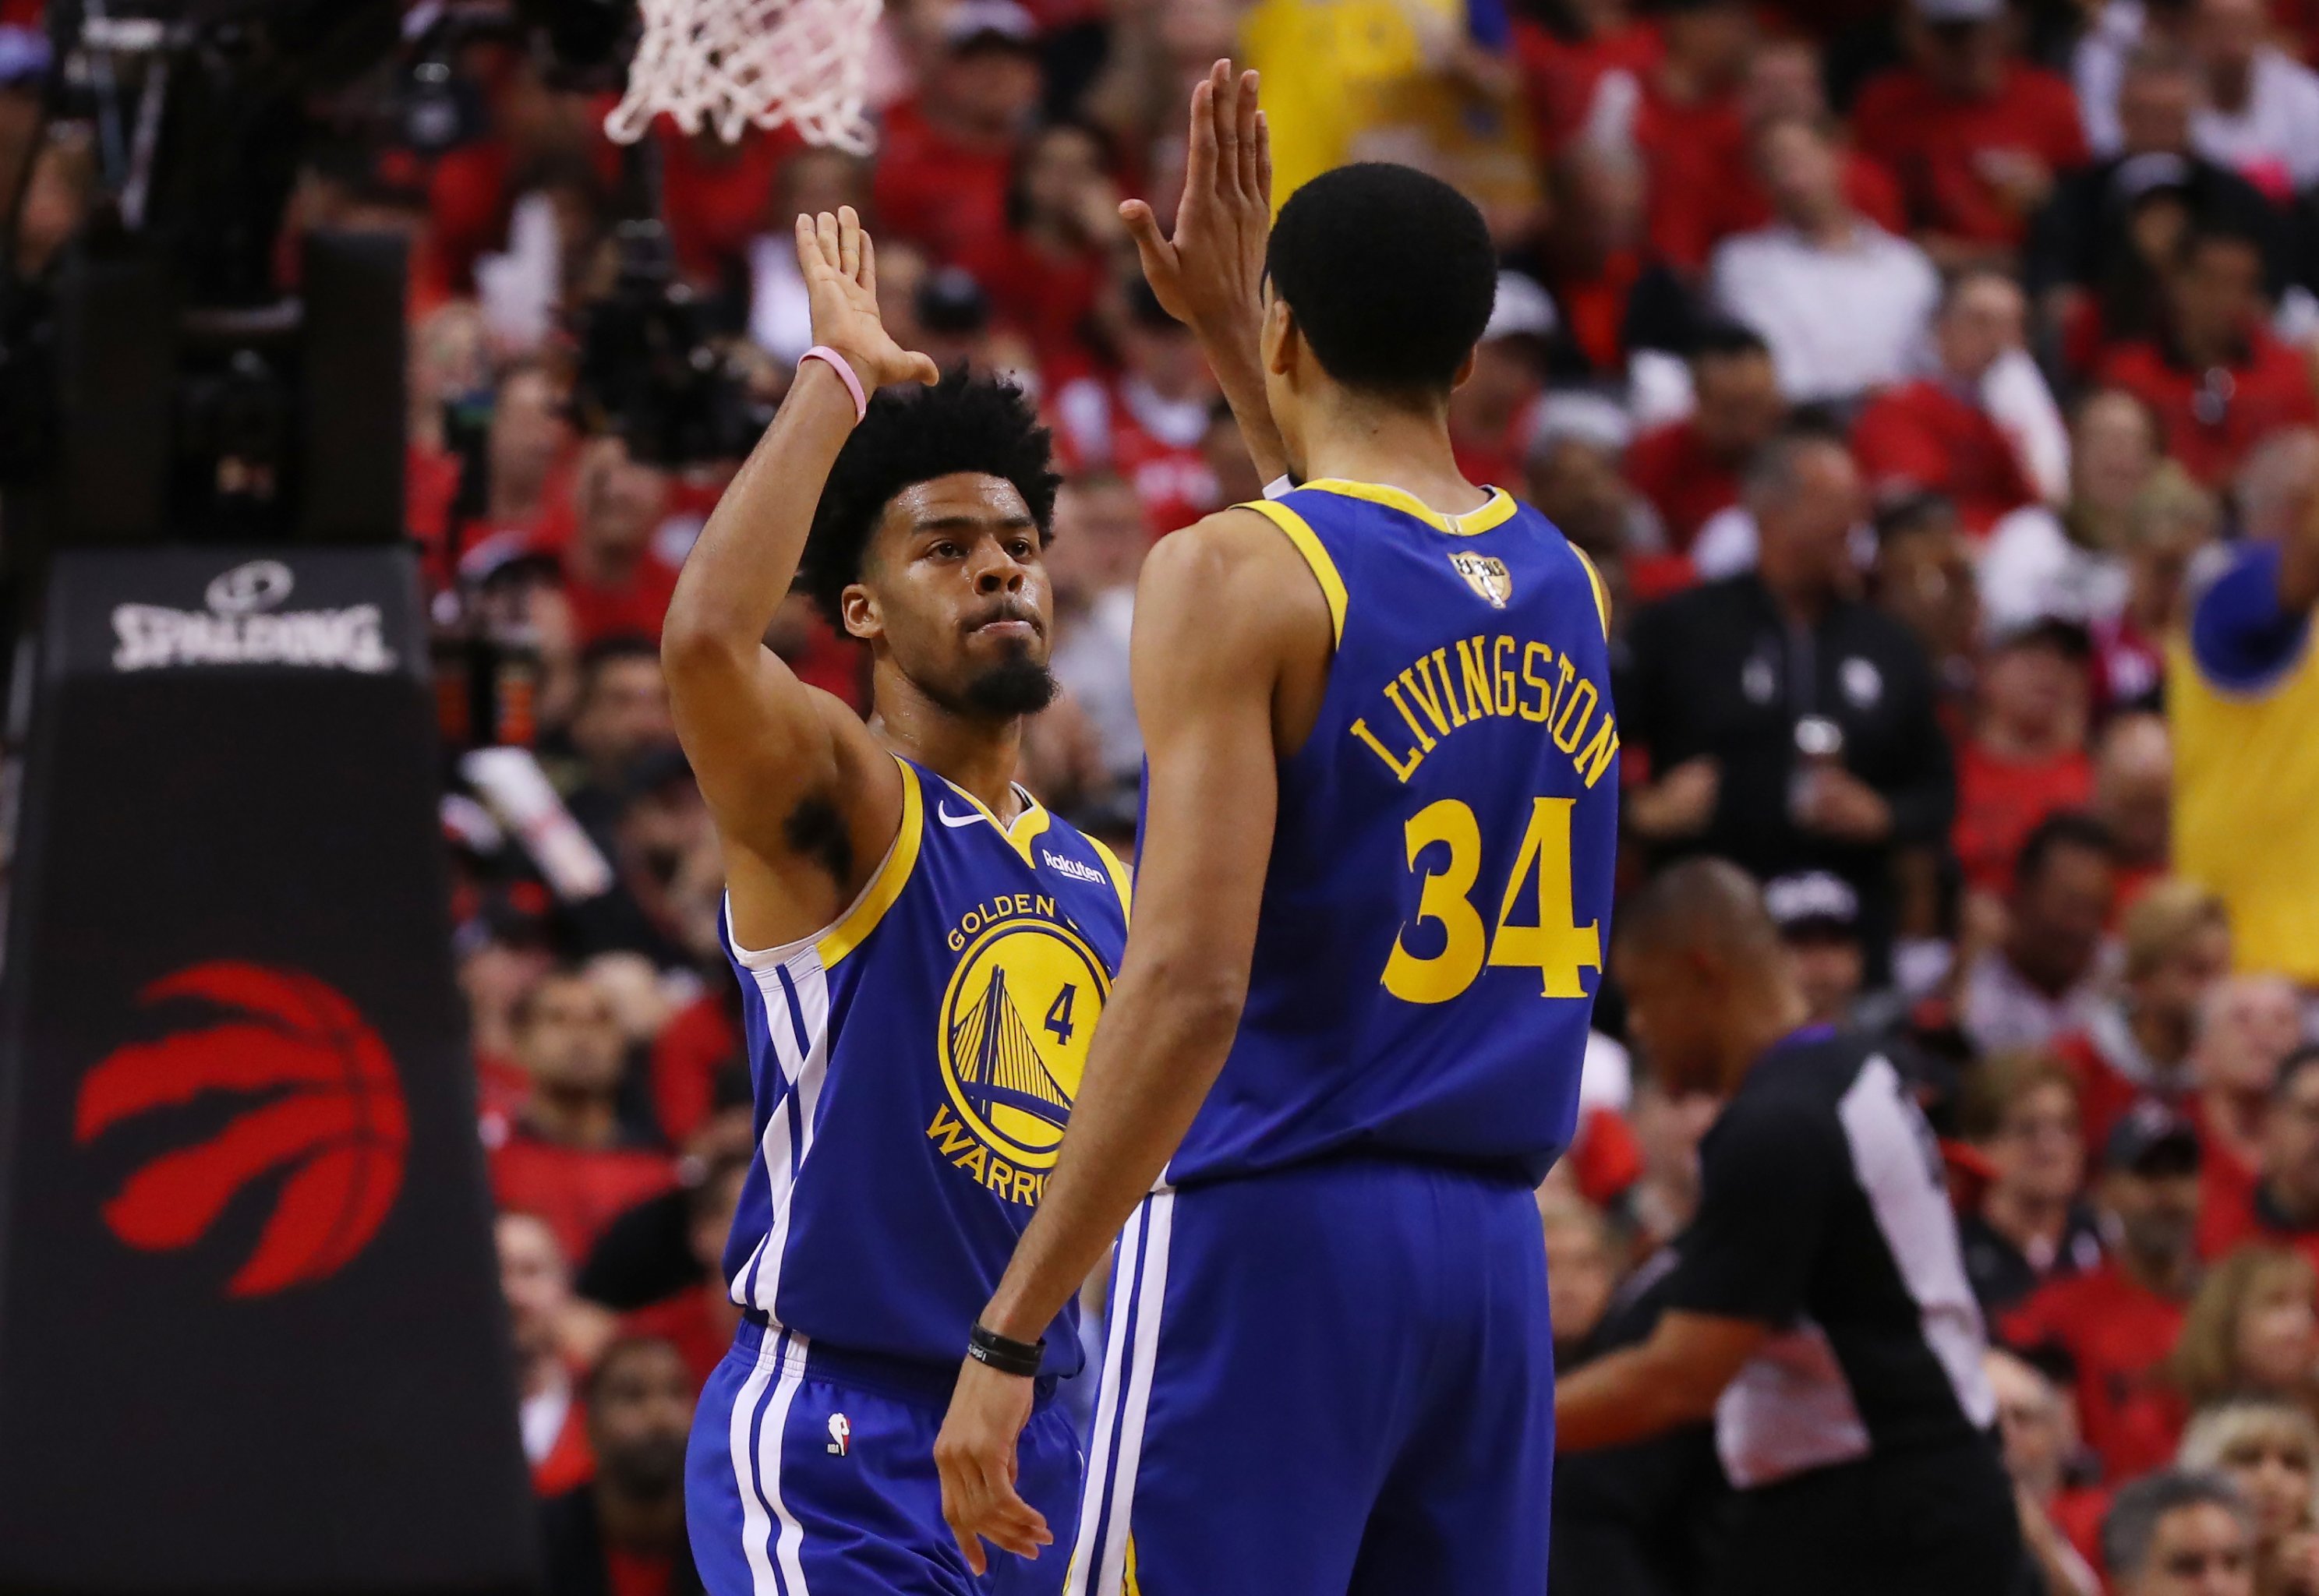 What's Wrong With the Golden State Warriors? Warped Expectations